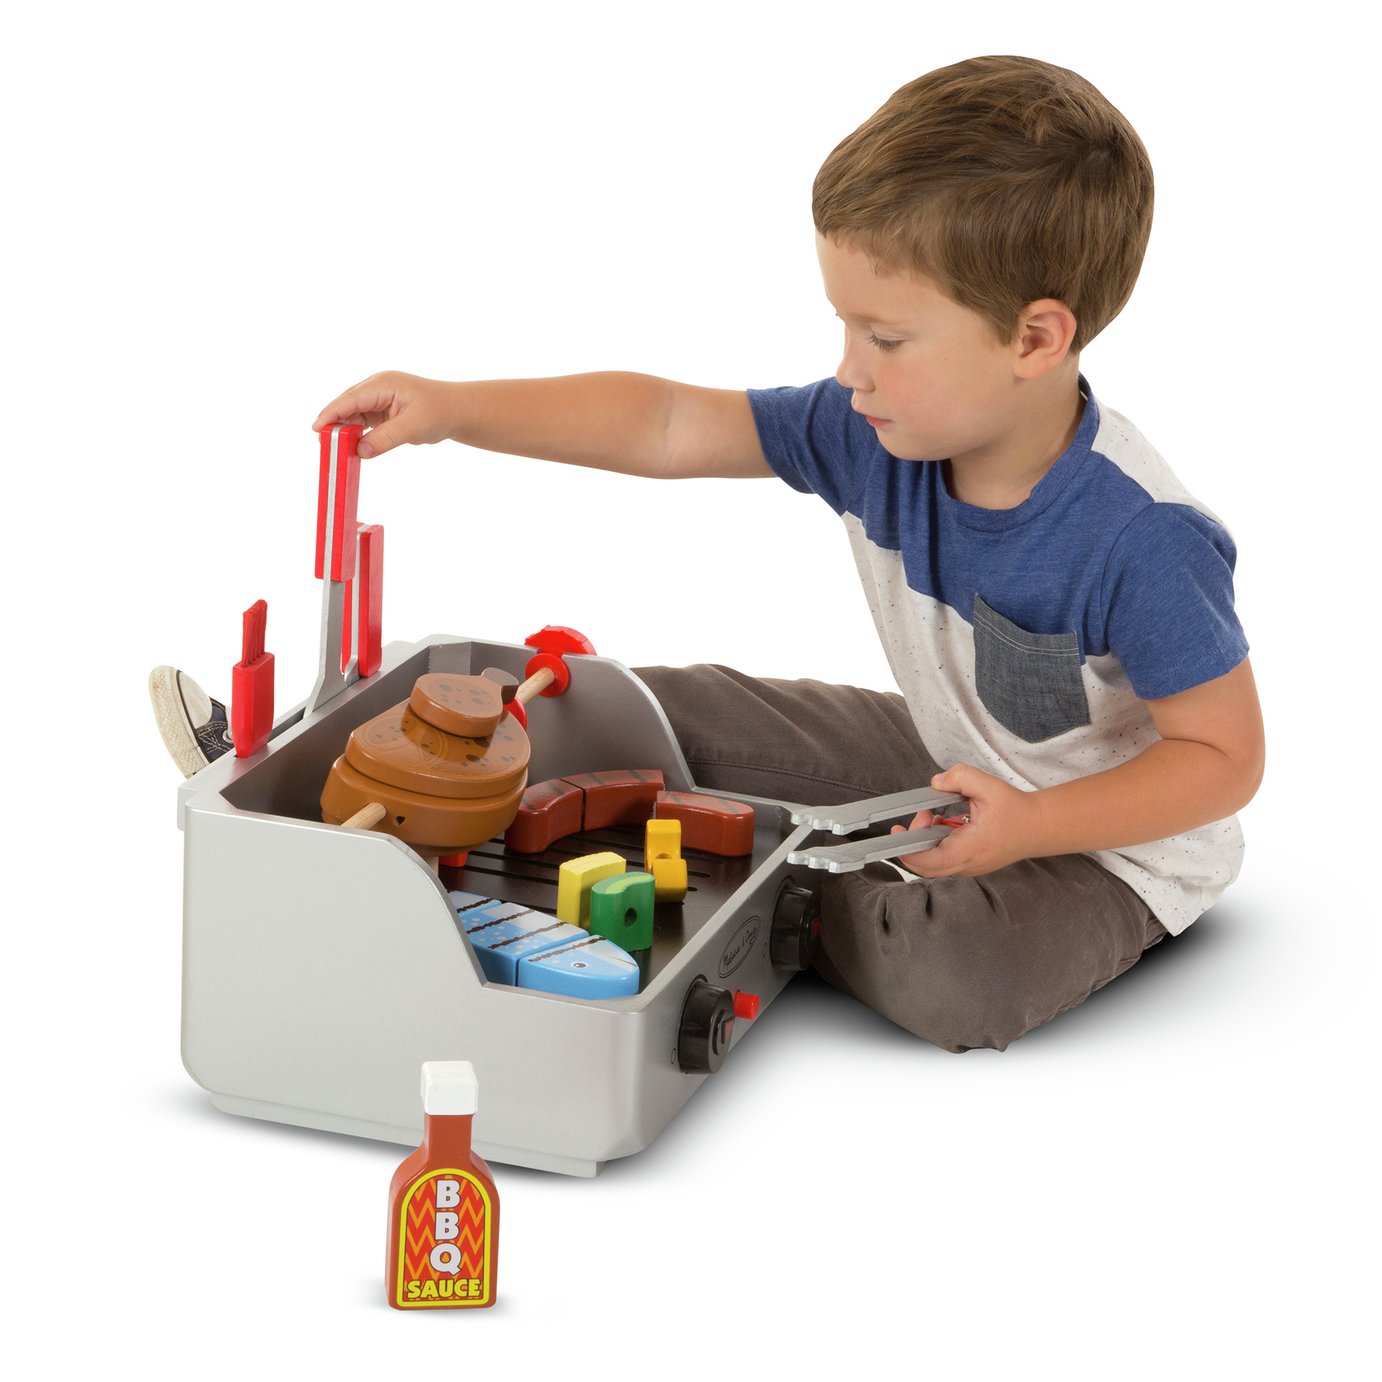 Melissa & Doug Deluxe Wooden Barbecue Play Set Review